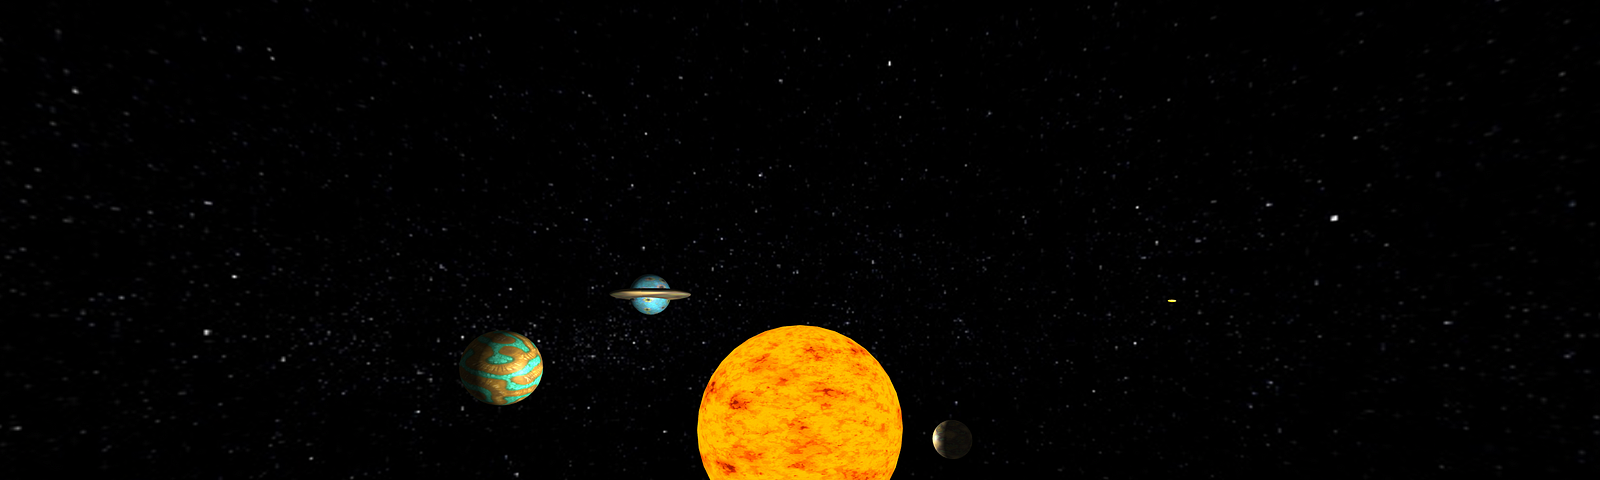 Image of product. A space like scene which includes a sun like star, shooting star, and 5 orbiting planets.